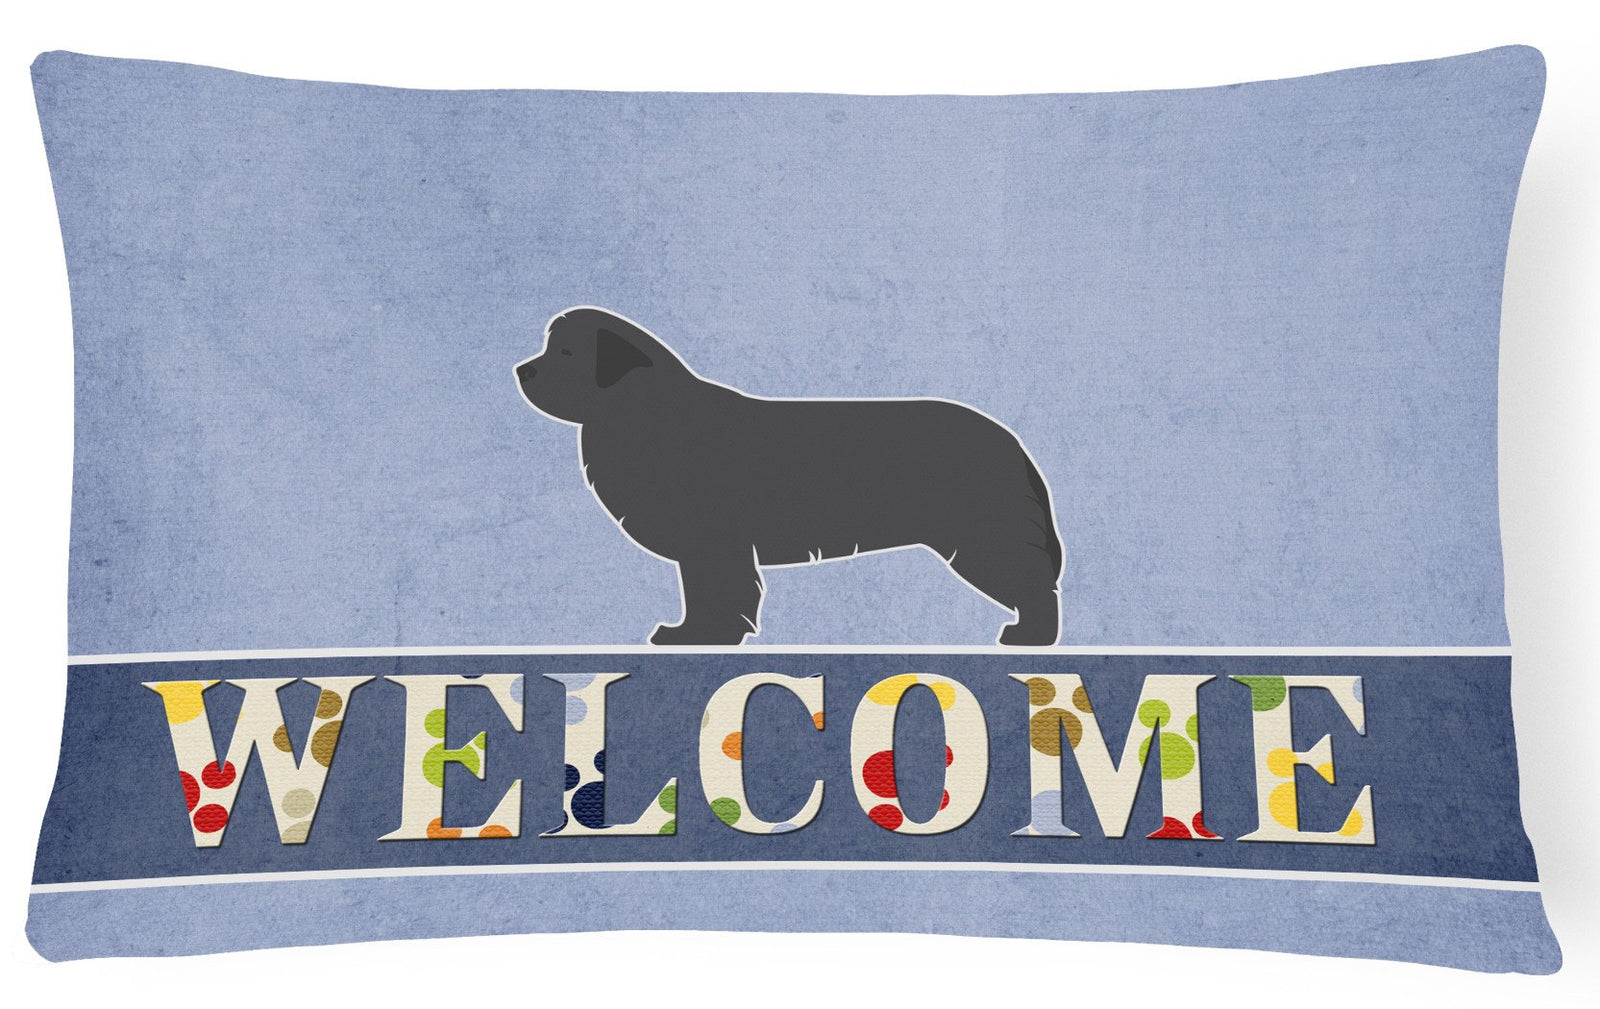 Newfoundland Welcome Canvas Fabric Decorative Pillow BB5568PW1216 by Caroline's Treasures